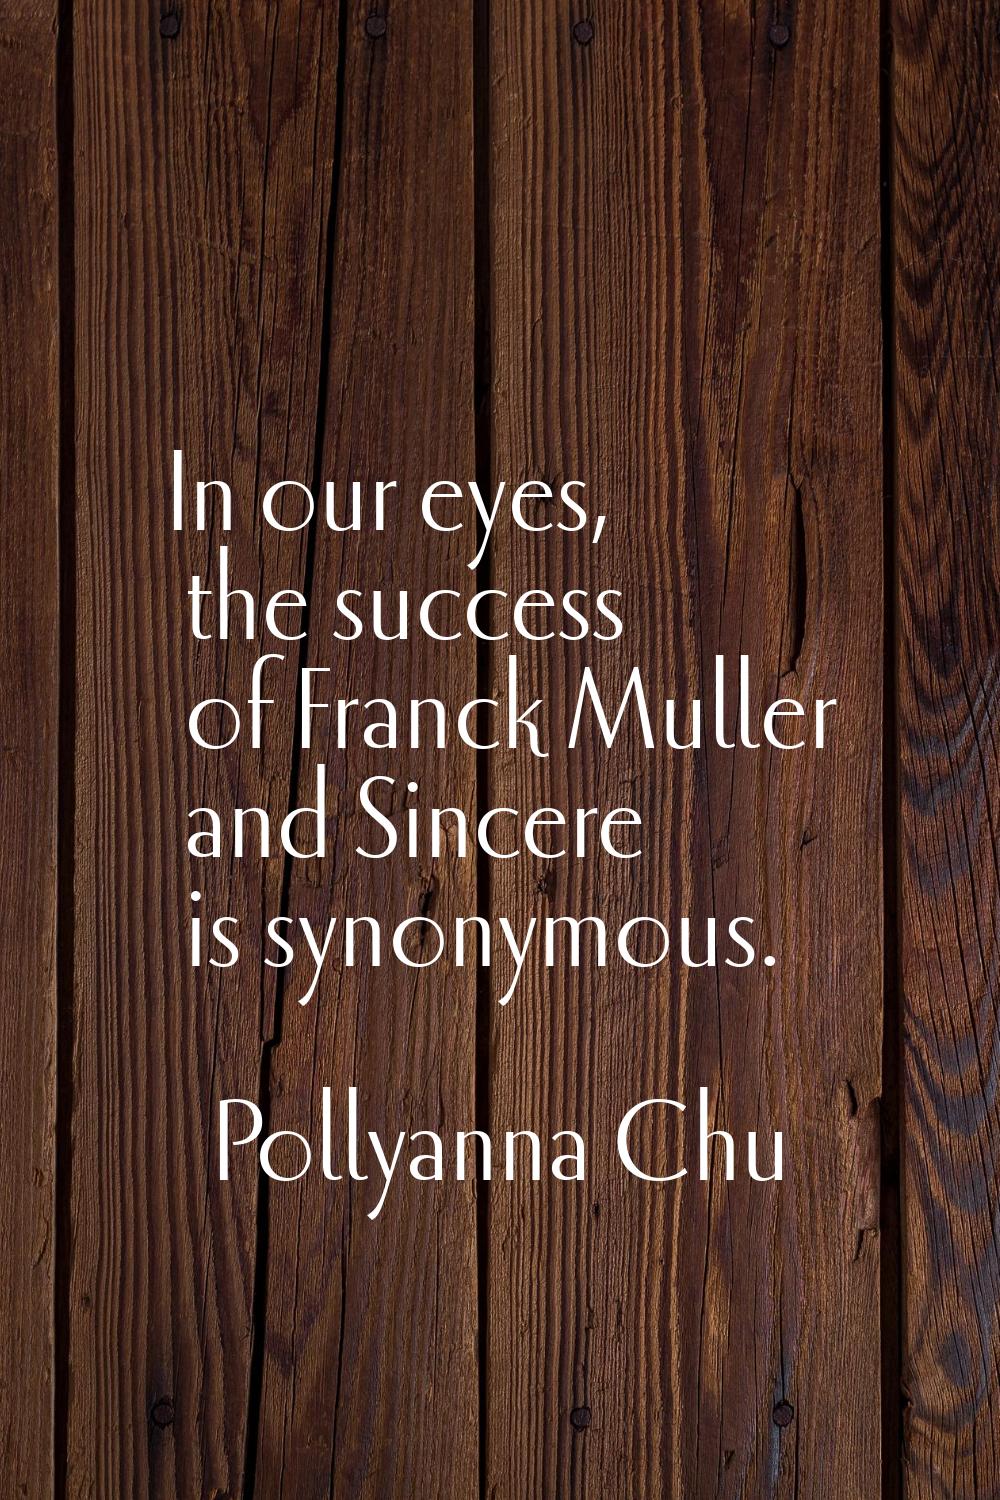 In our eyes, the success of Franck Muller and Sincere is synonymous.